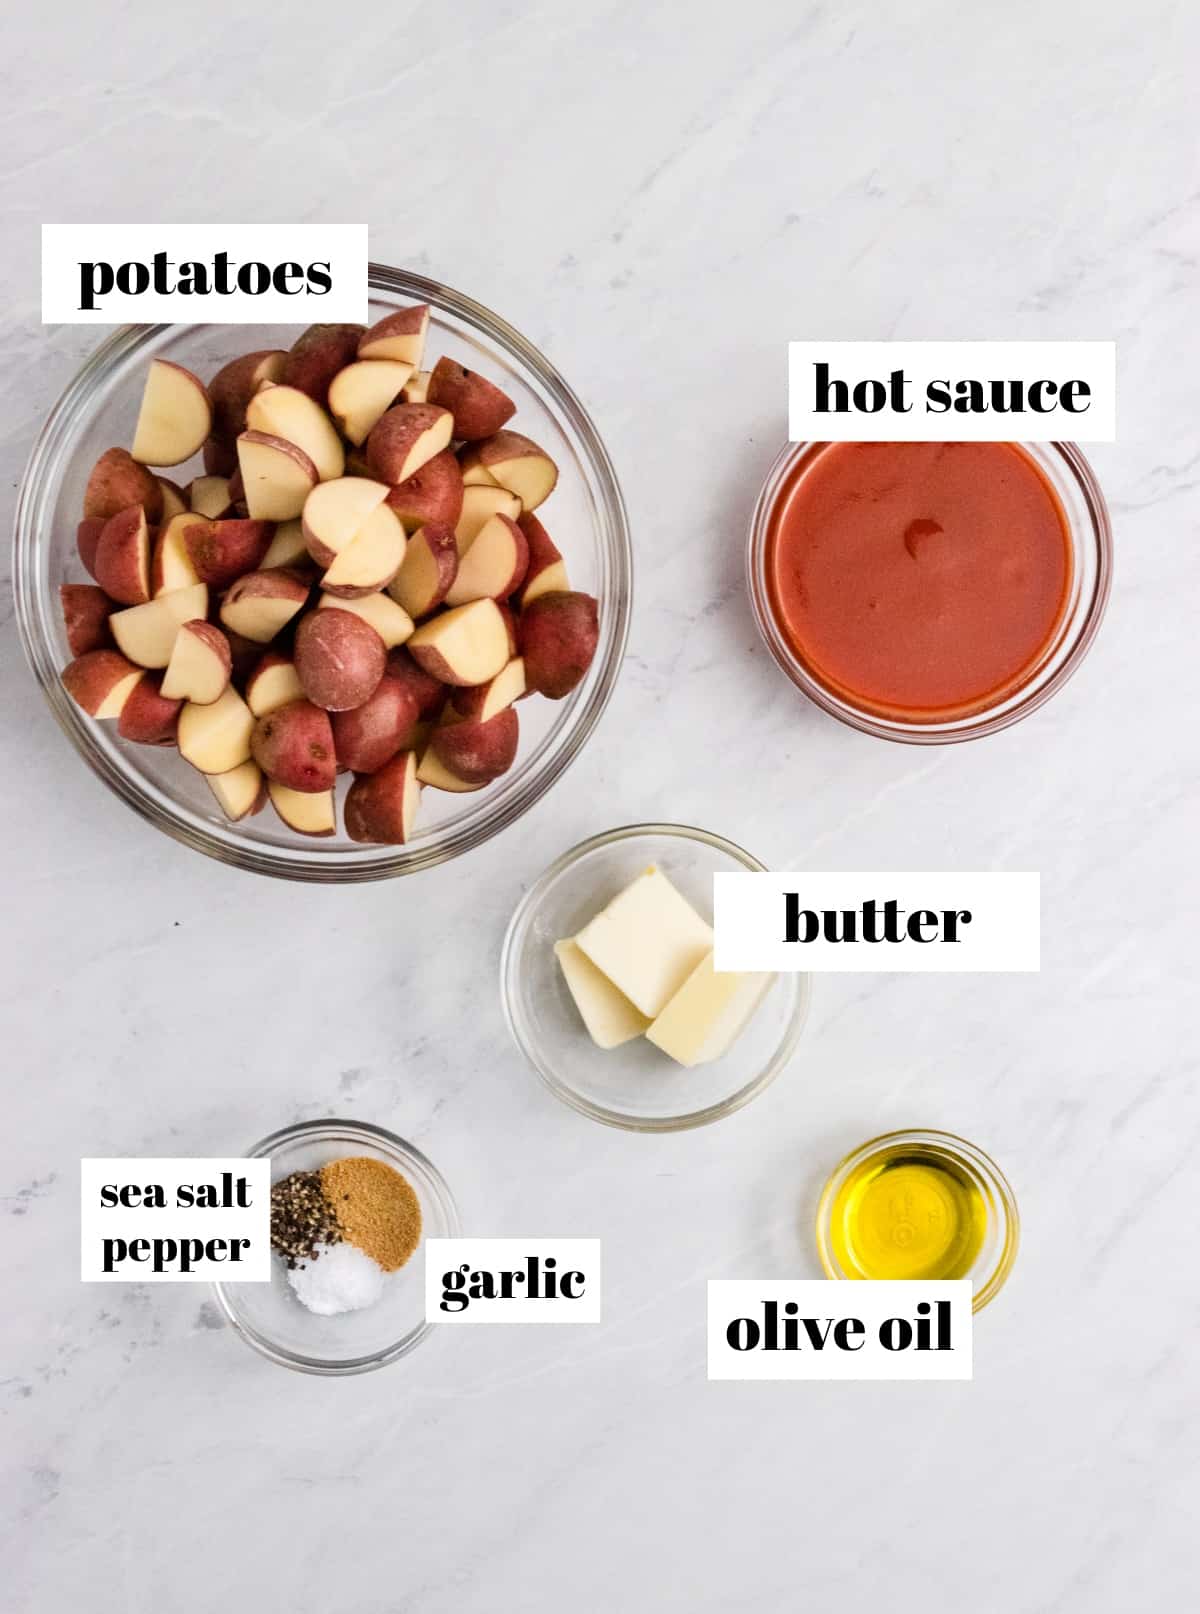 Baby potatoes, hot sauce, butter and other ingredients on counter.